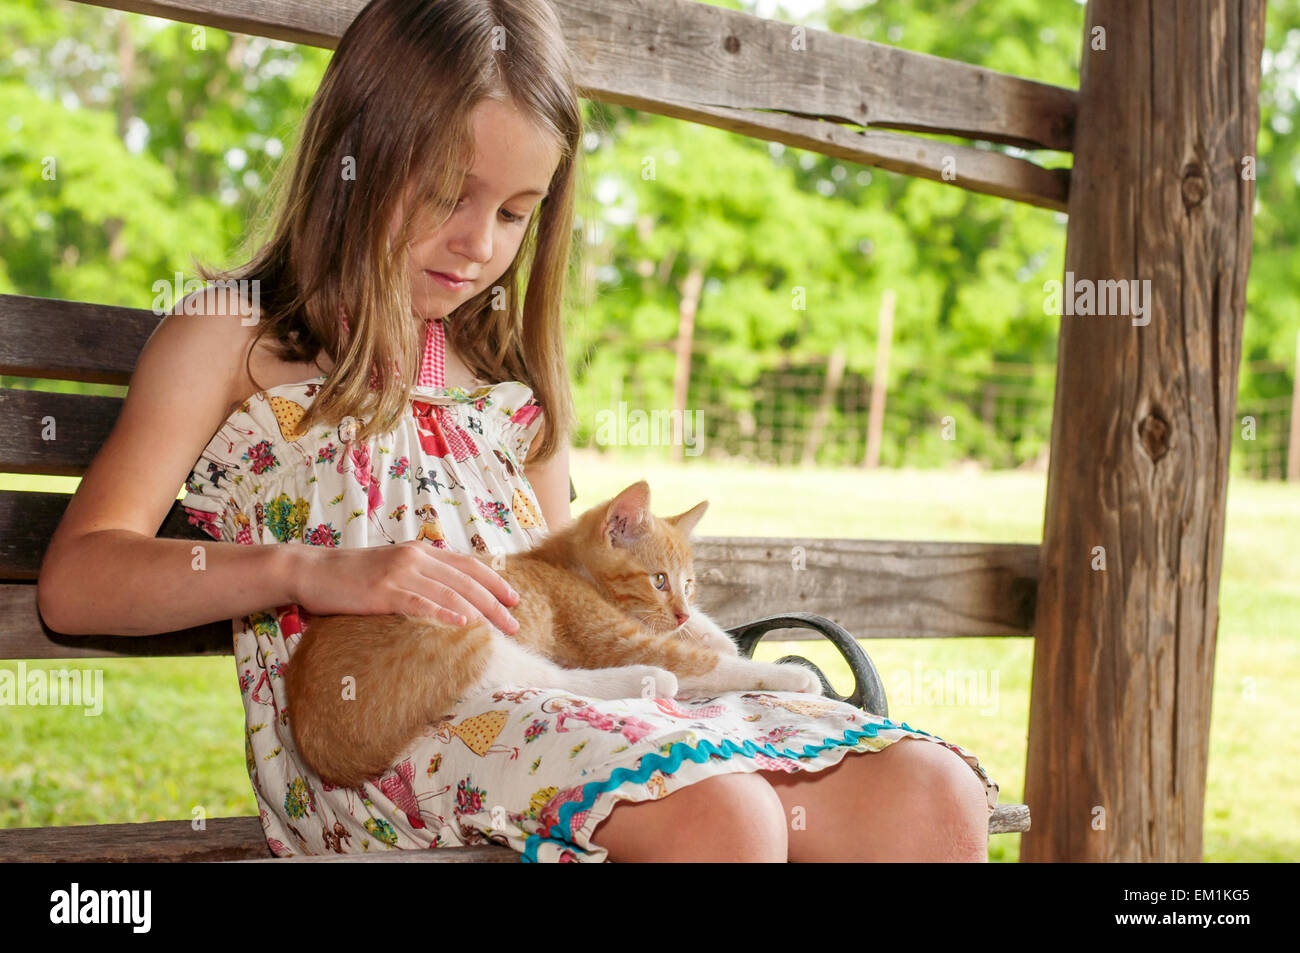 Girl petting chaton in barn Banque D'Images